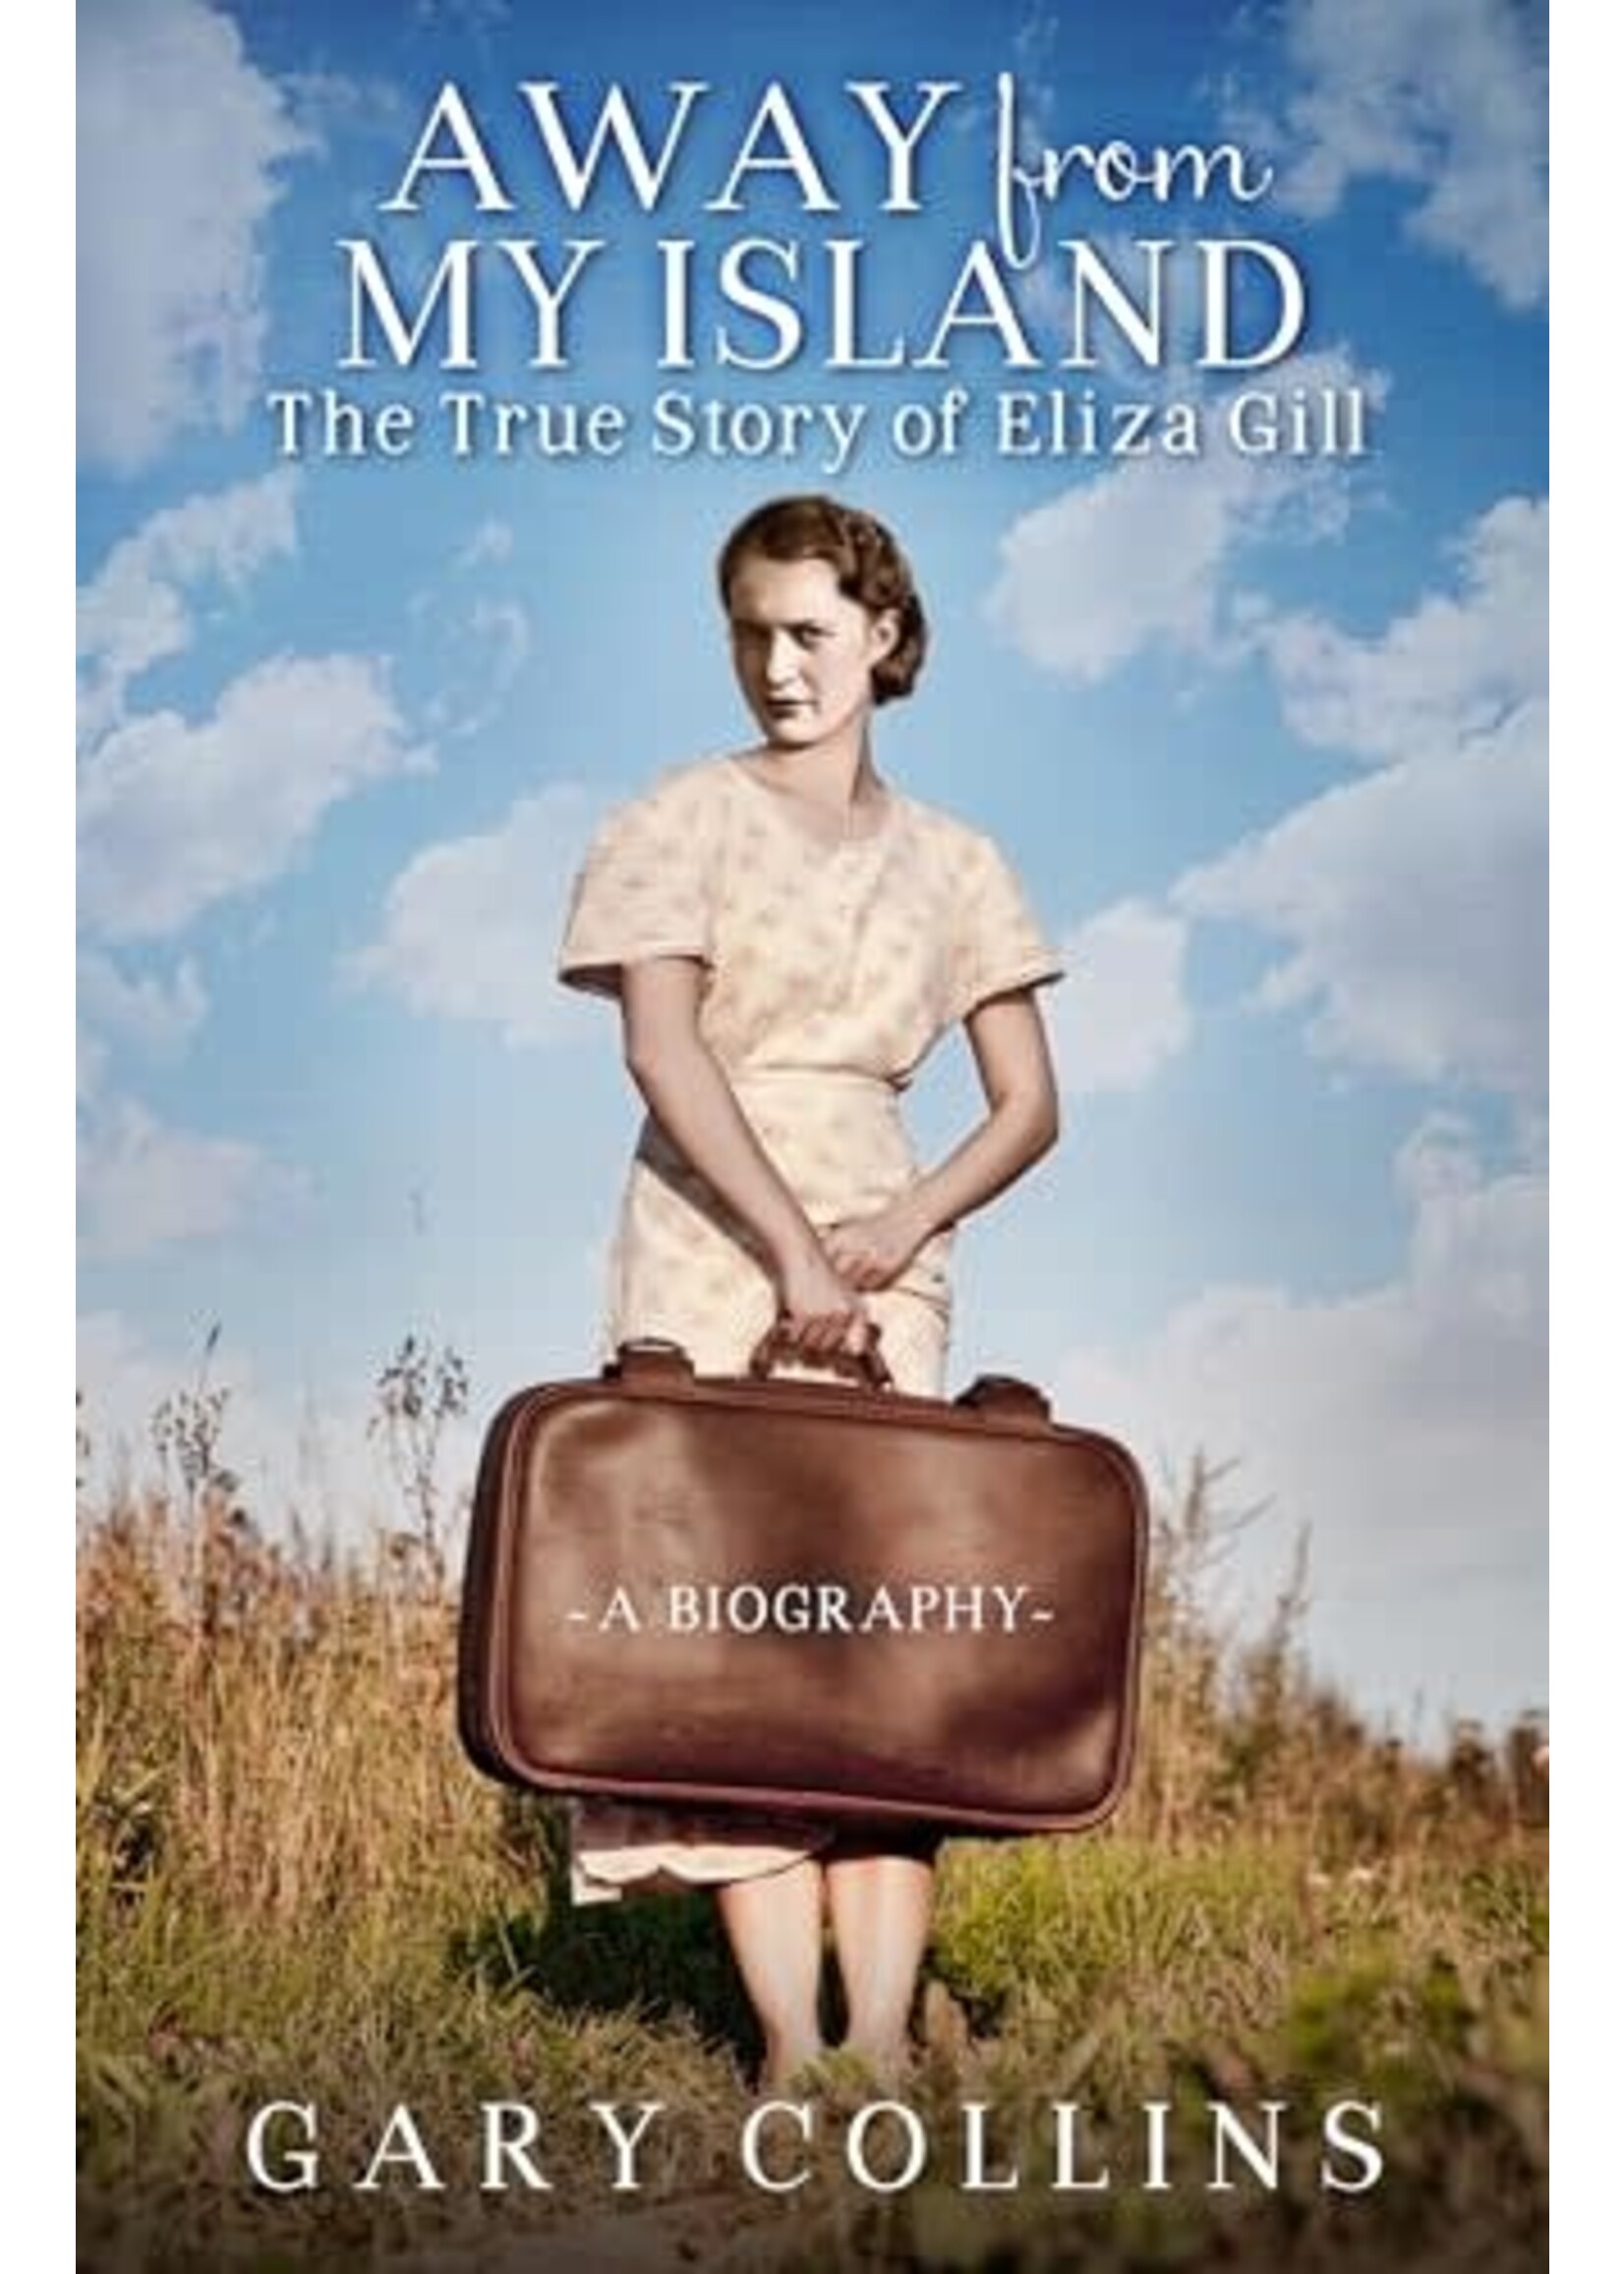 Away from My Island: The True Story of Eliza Gill by Gary Collins